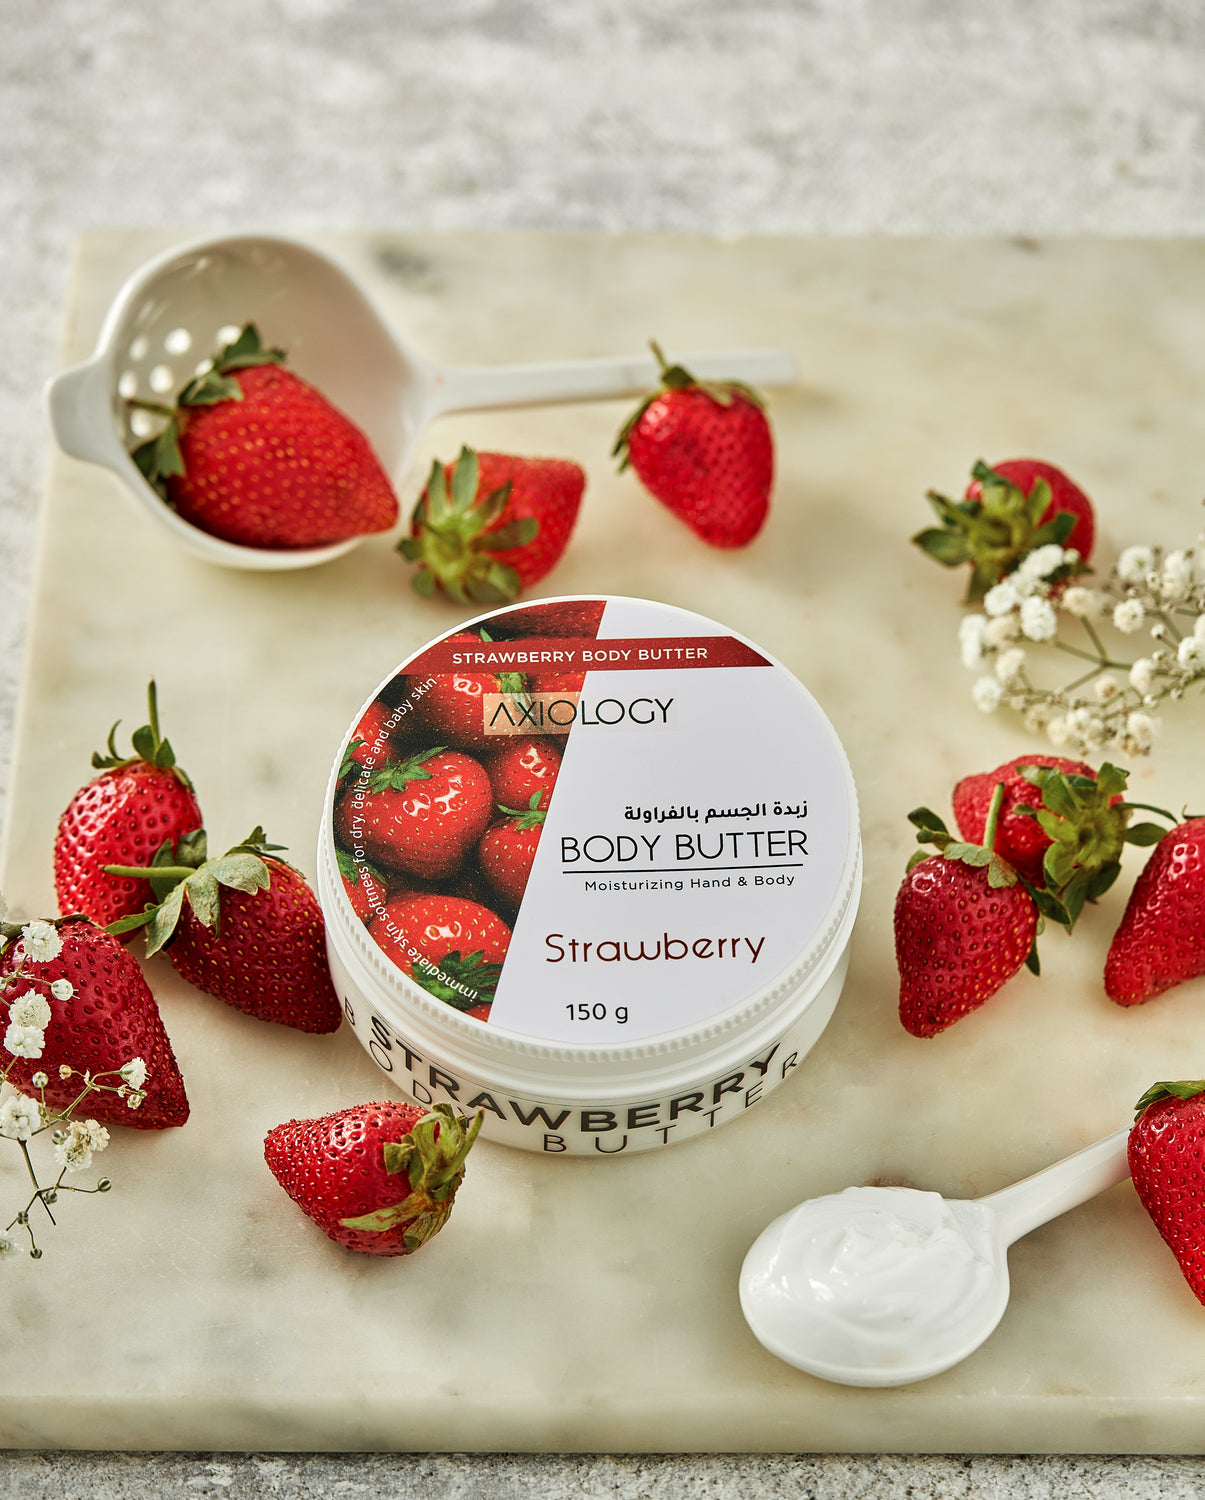 Strawberry Body Butter 150 g from AXIOLOGY